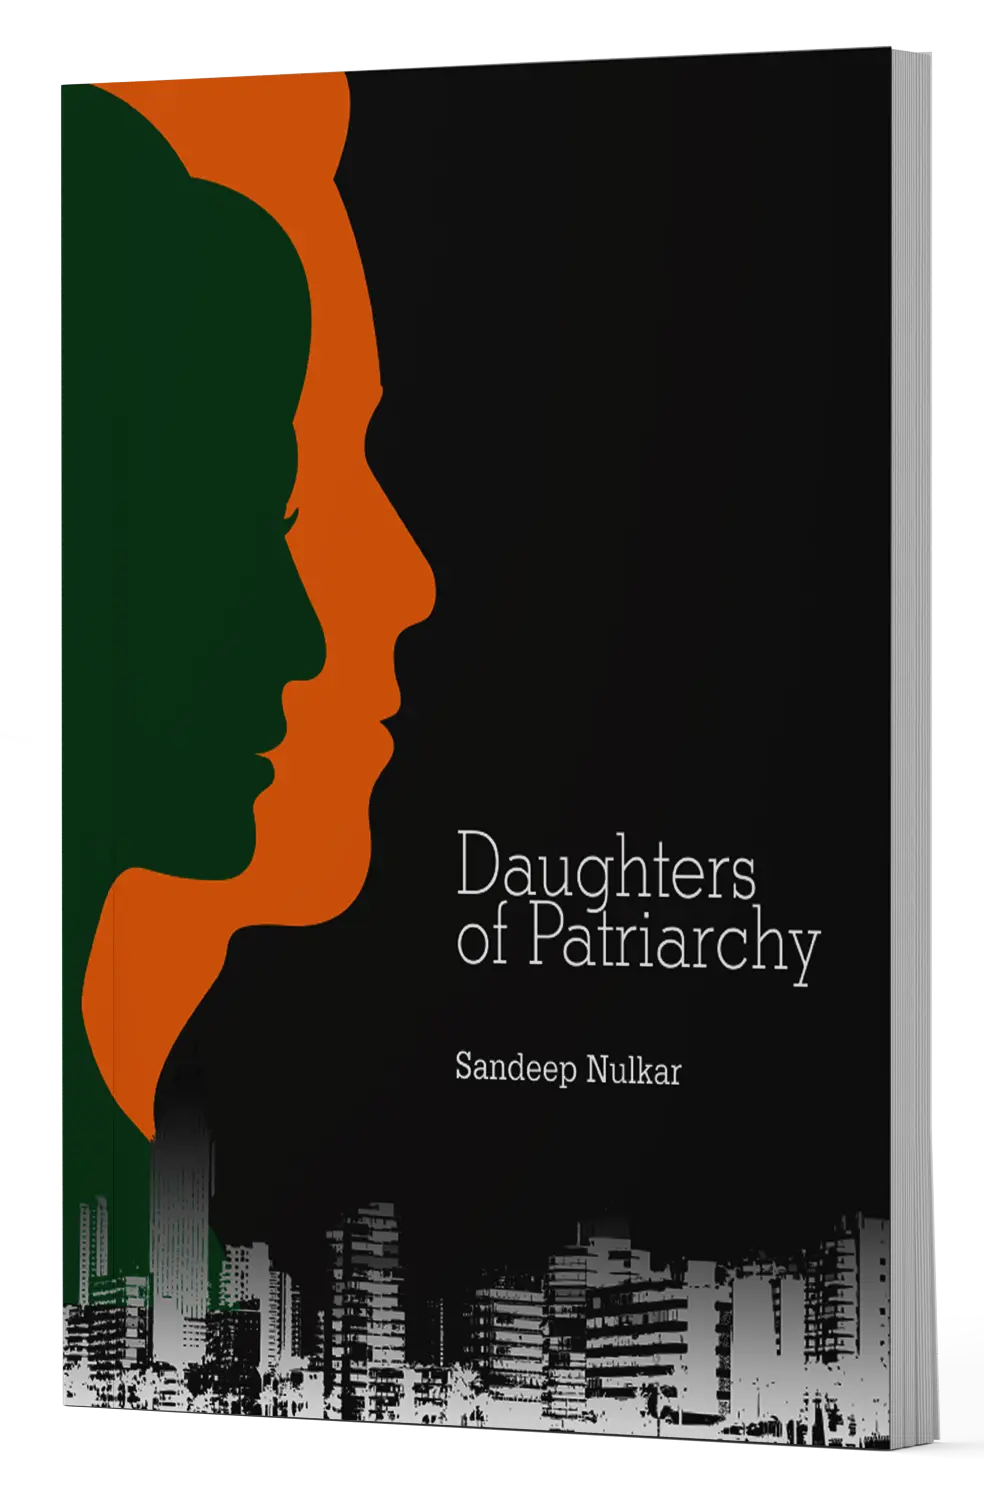 Daughters of Patriarchy